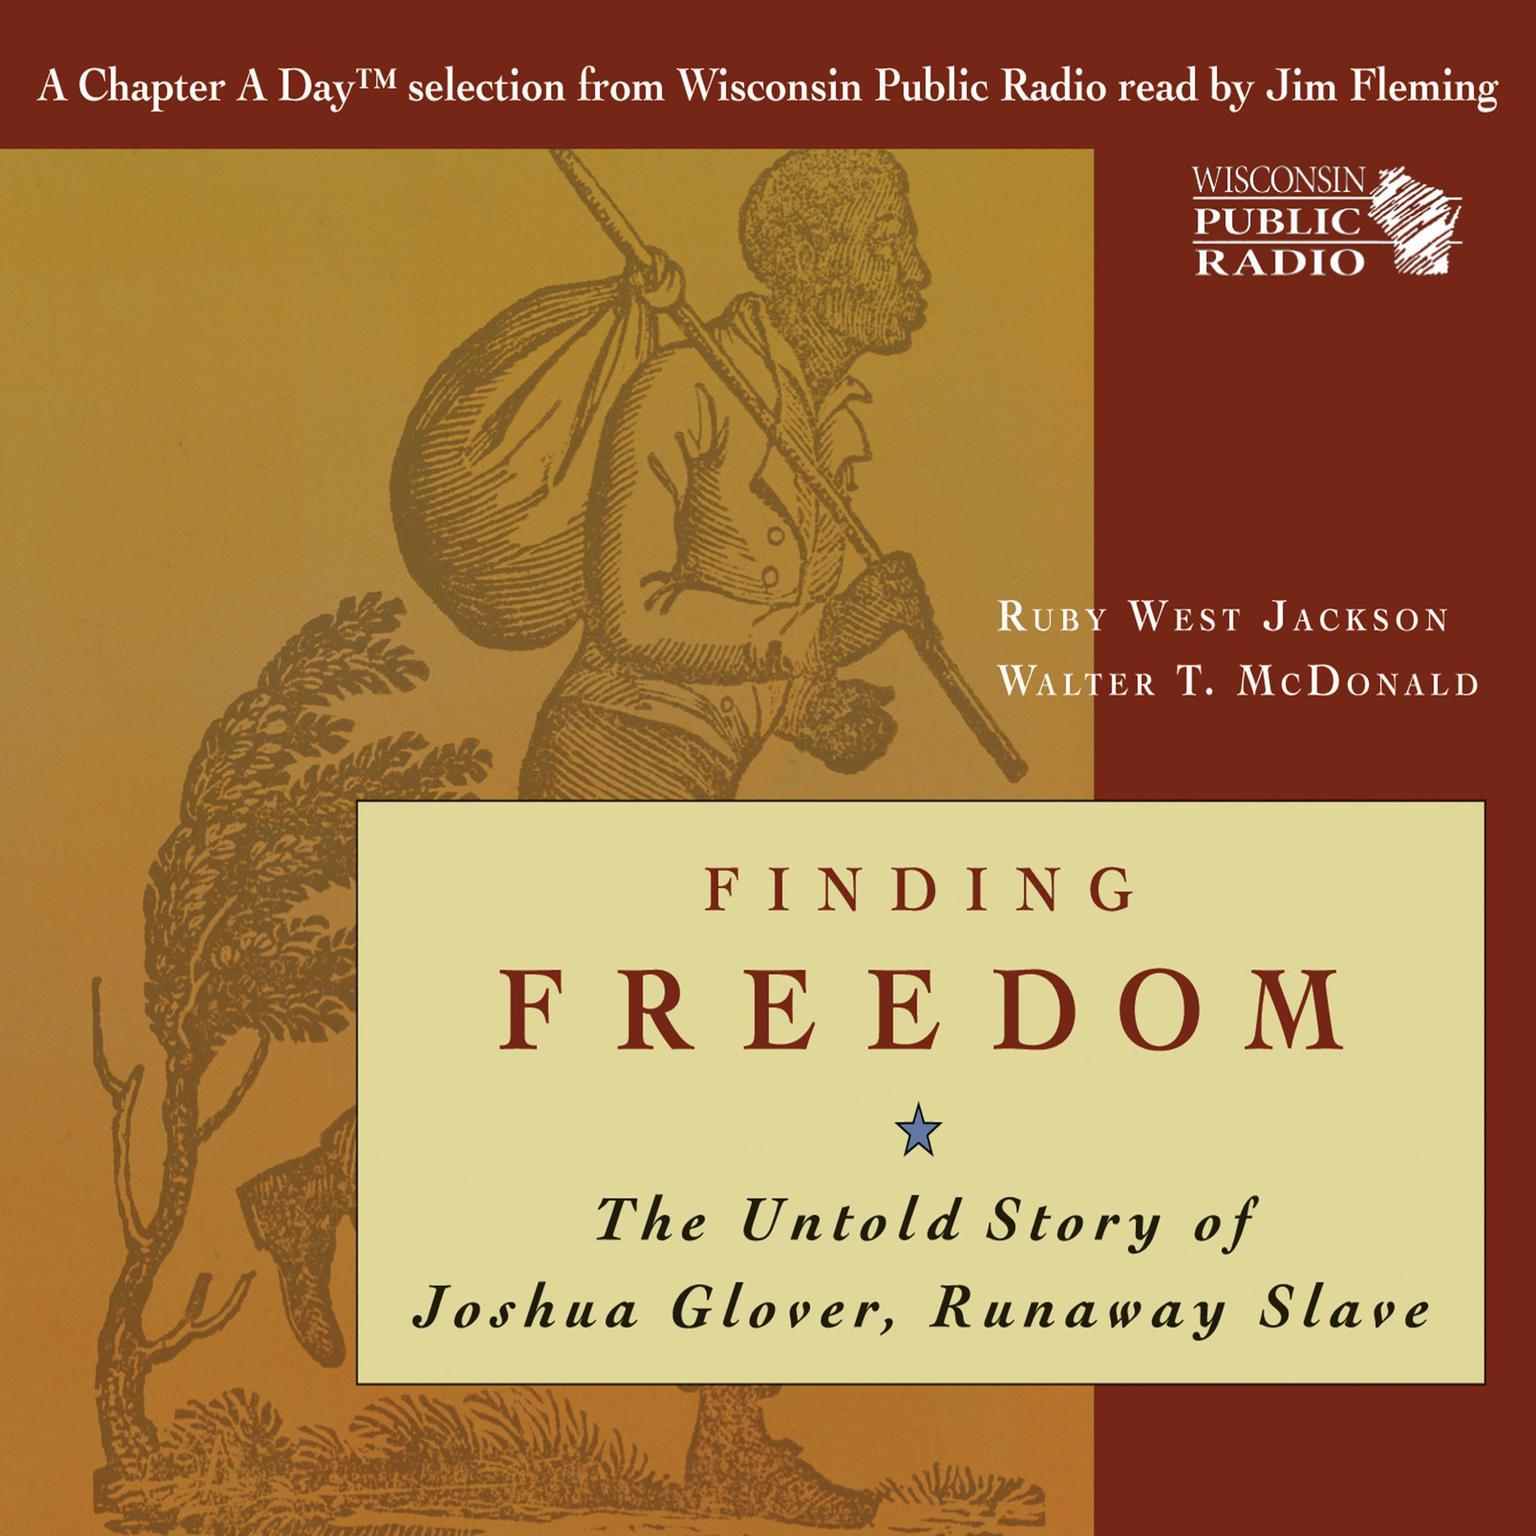 Finding Freedom: The Untold Story of Joshua Glover, Runaway Slave: The Untold Story of Joshua Glover, Runaway Slave Audiobook, by Ruby West Jackson